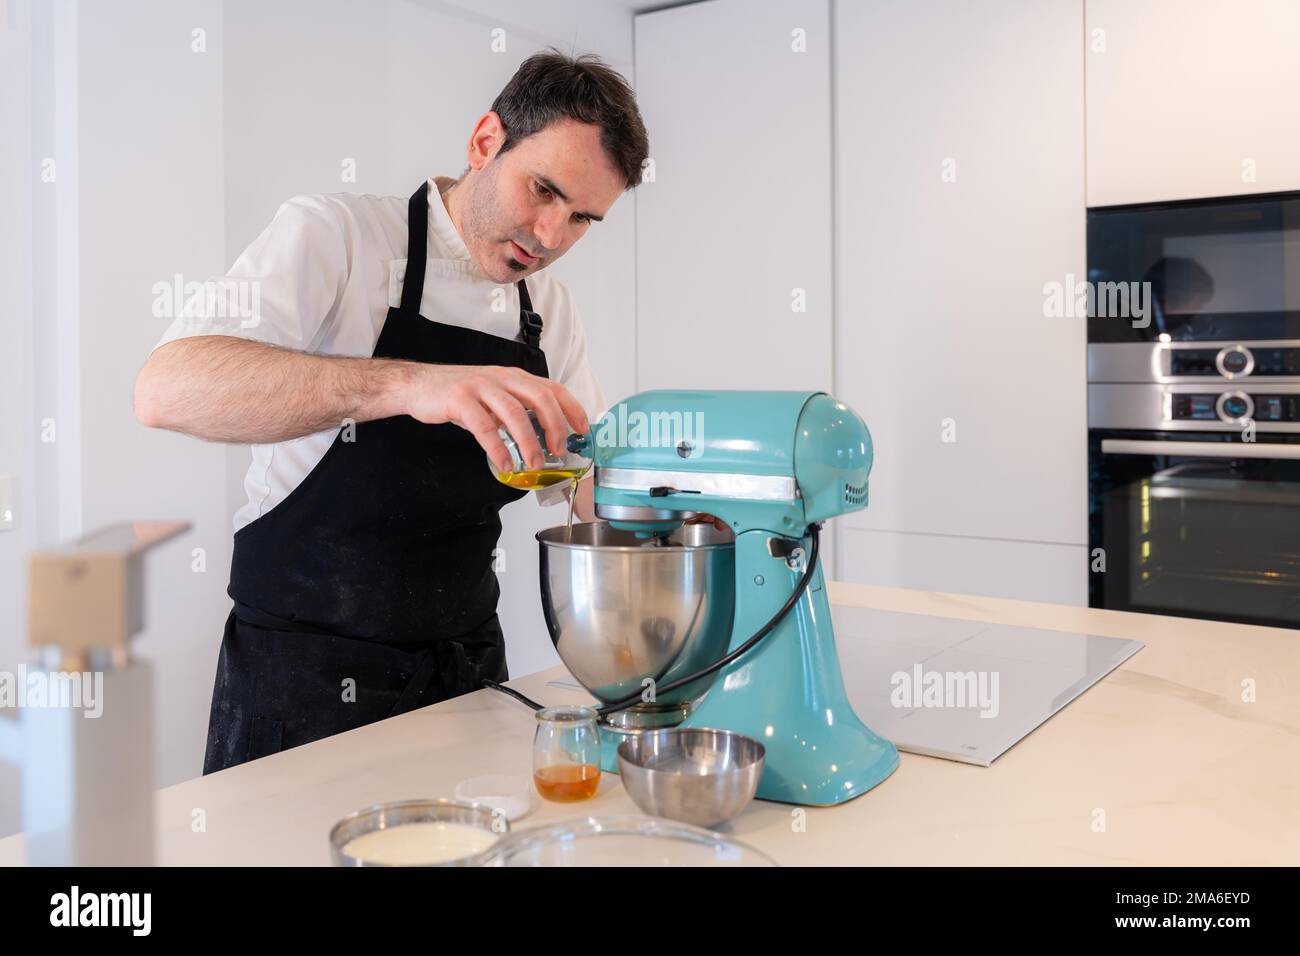 A man baker bakes a red velvet cake at home, preparing the cake by adding oil in the food processor, work at home Stock Photo